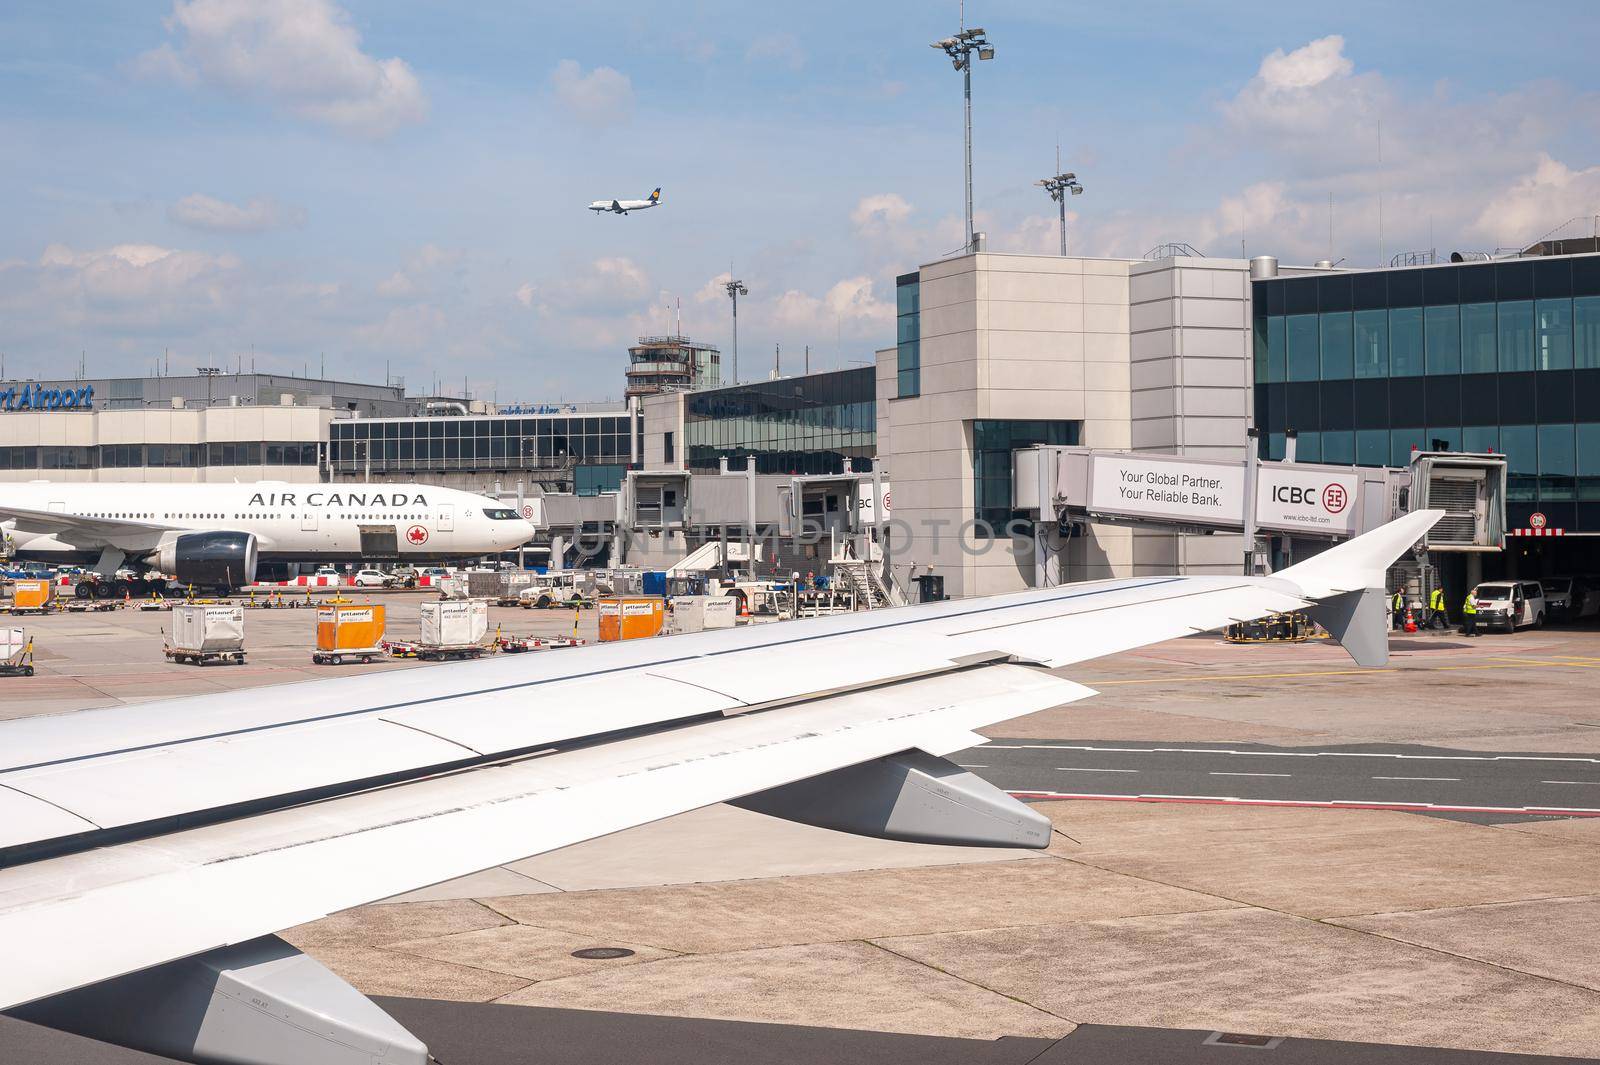 05/26/2019 Frankfurt Airport, Germany. Frankfurt Airport is the busiest airport by passenger traffic in Germany as well as the 4th busiest in Europe. Operated by Fraport and serves as the main hub for Lufthansa including Lufthansa CityLine and Lufthansa Ca by Qba